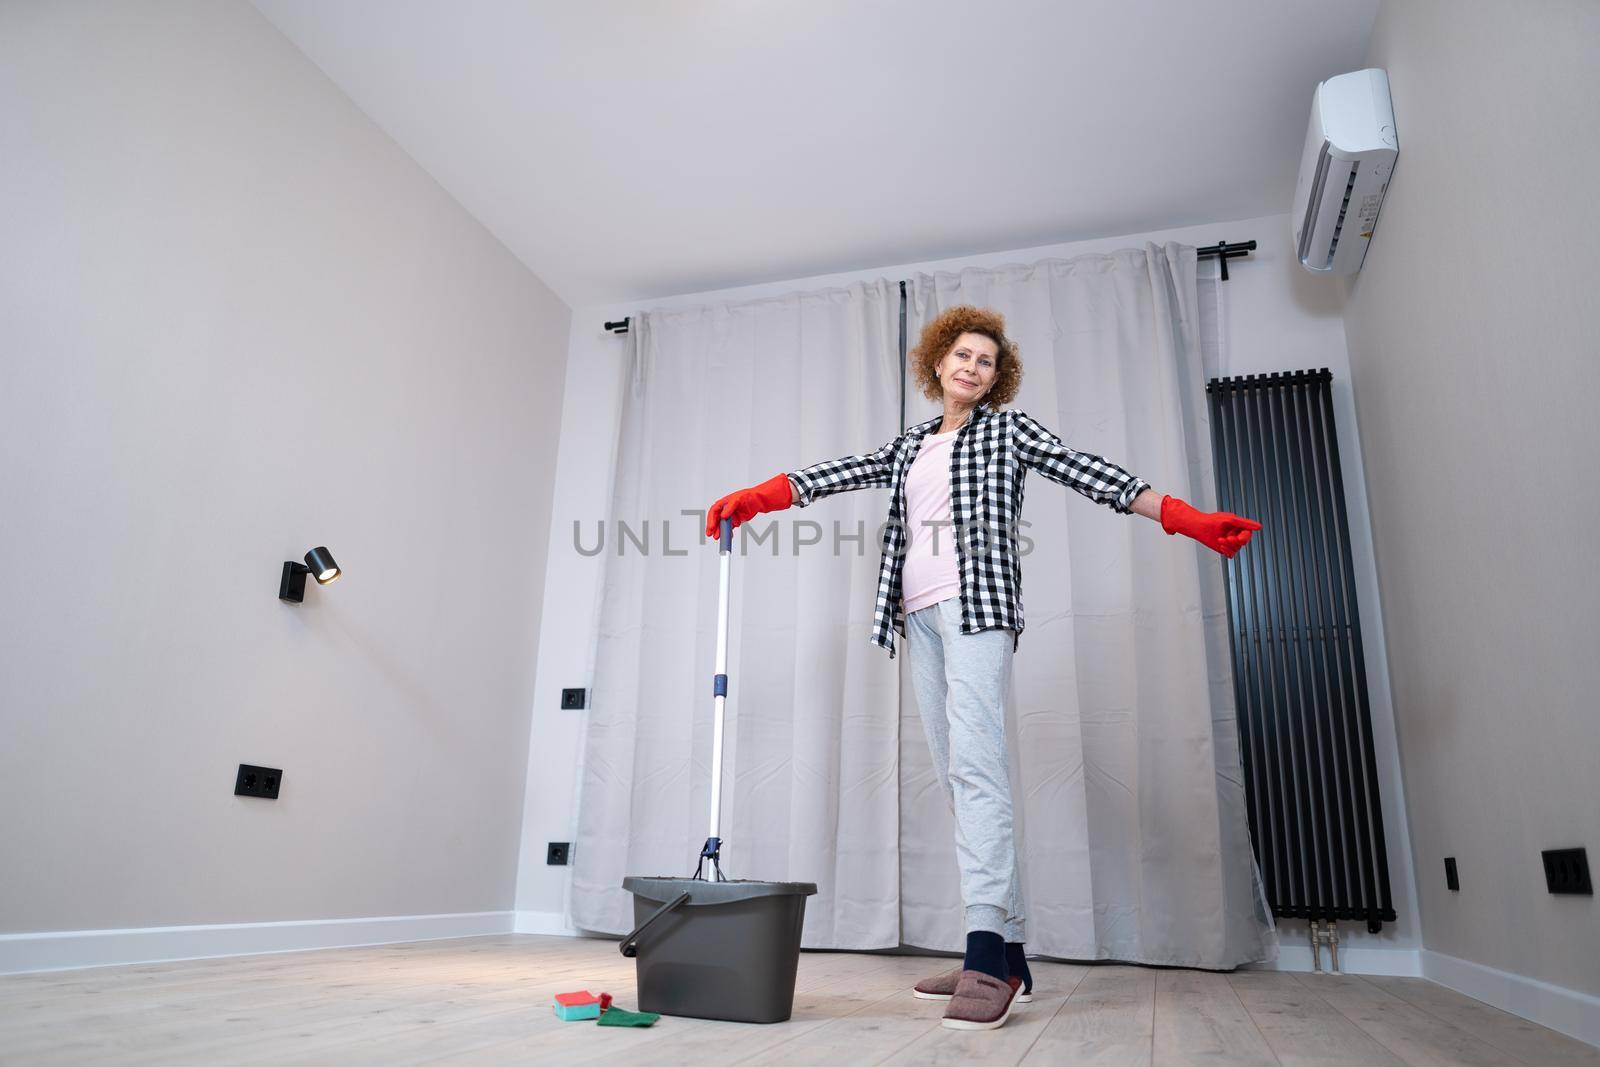 Jolly excited mature woman enjoying cleaning house, she dancing while washing floor. Happy elderly woman enjoying cleaning floors before moving to new apartment. Housework and housekeeping concept.